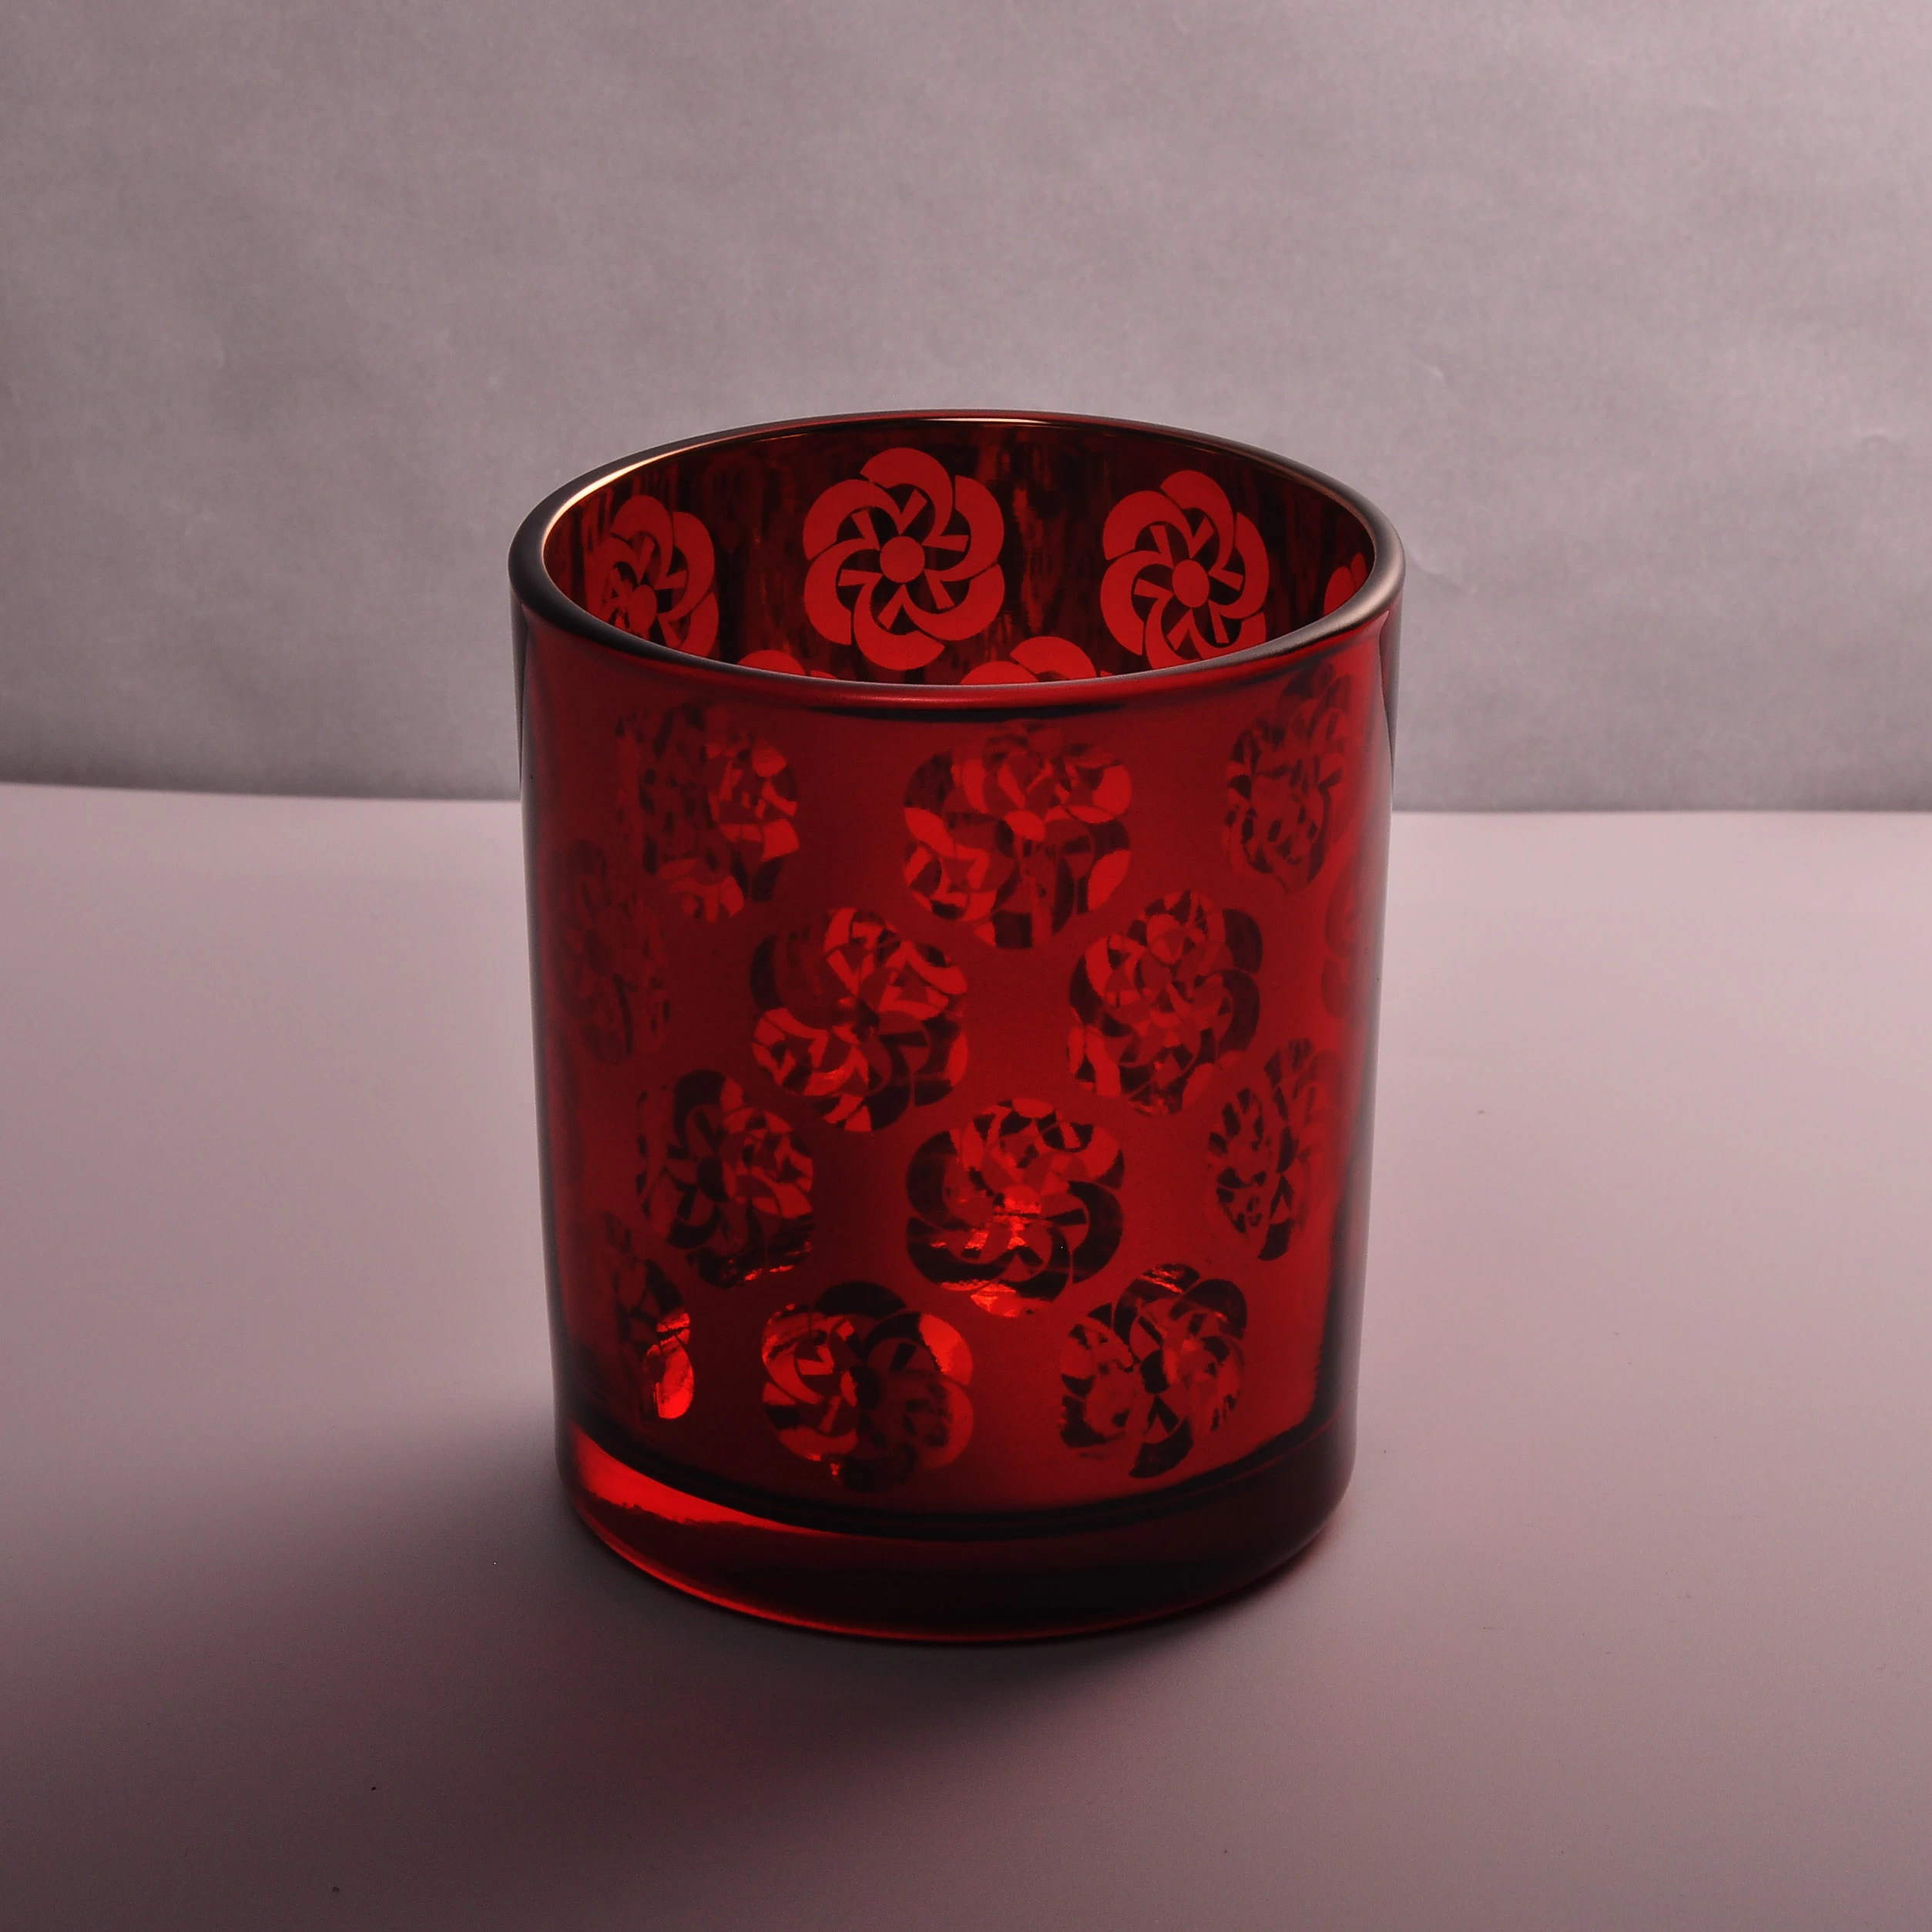 Laser engraving finished glass candle holders